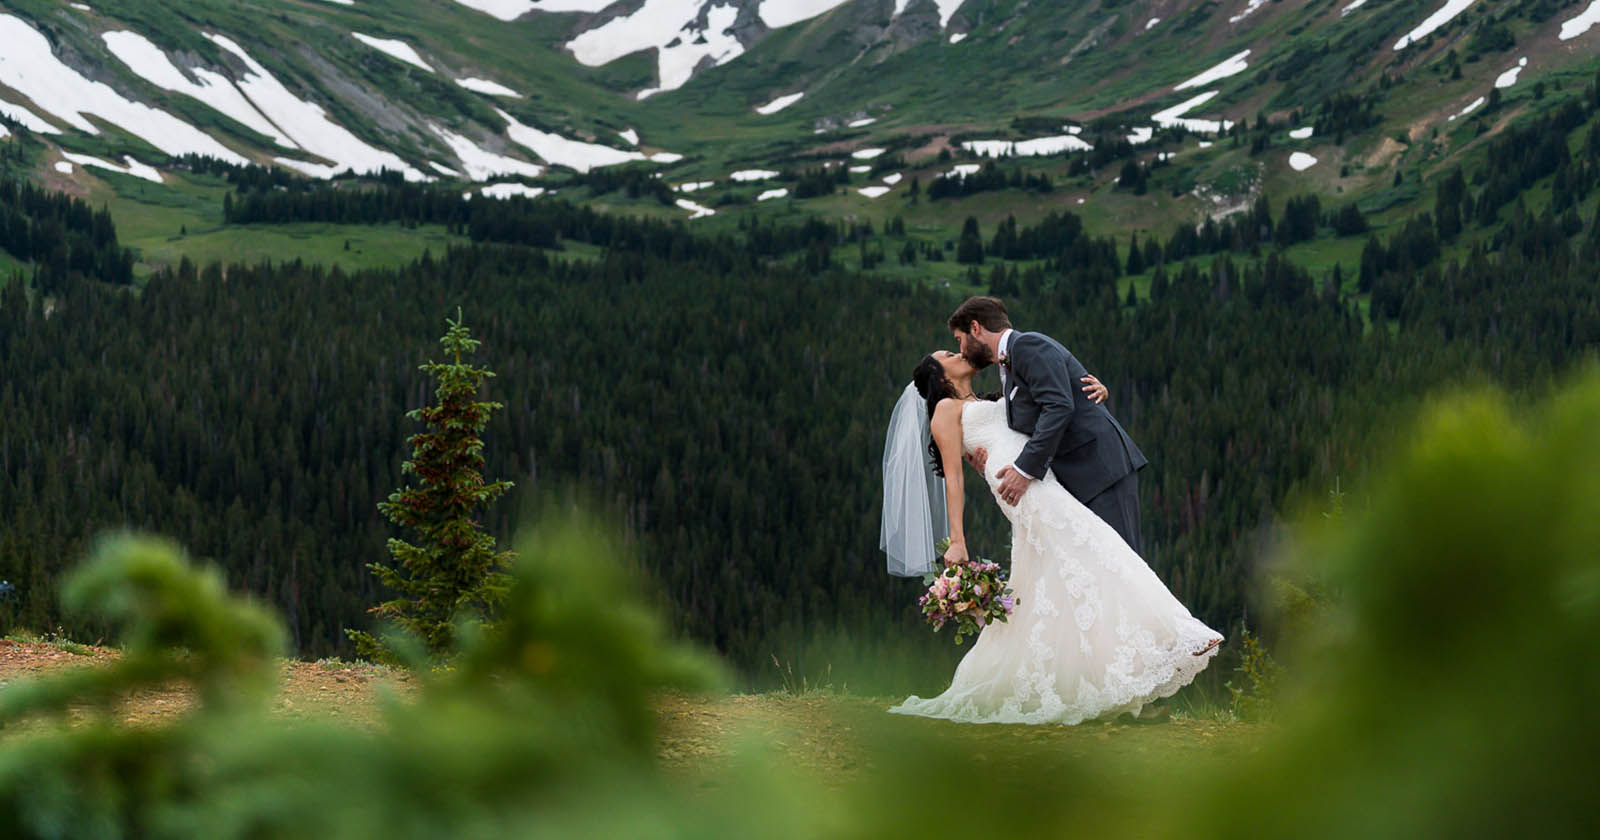 WHY ARE PROFESSIONAL WEDDING PHOTOGRAPHERS SO IMPORTANT?